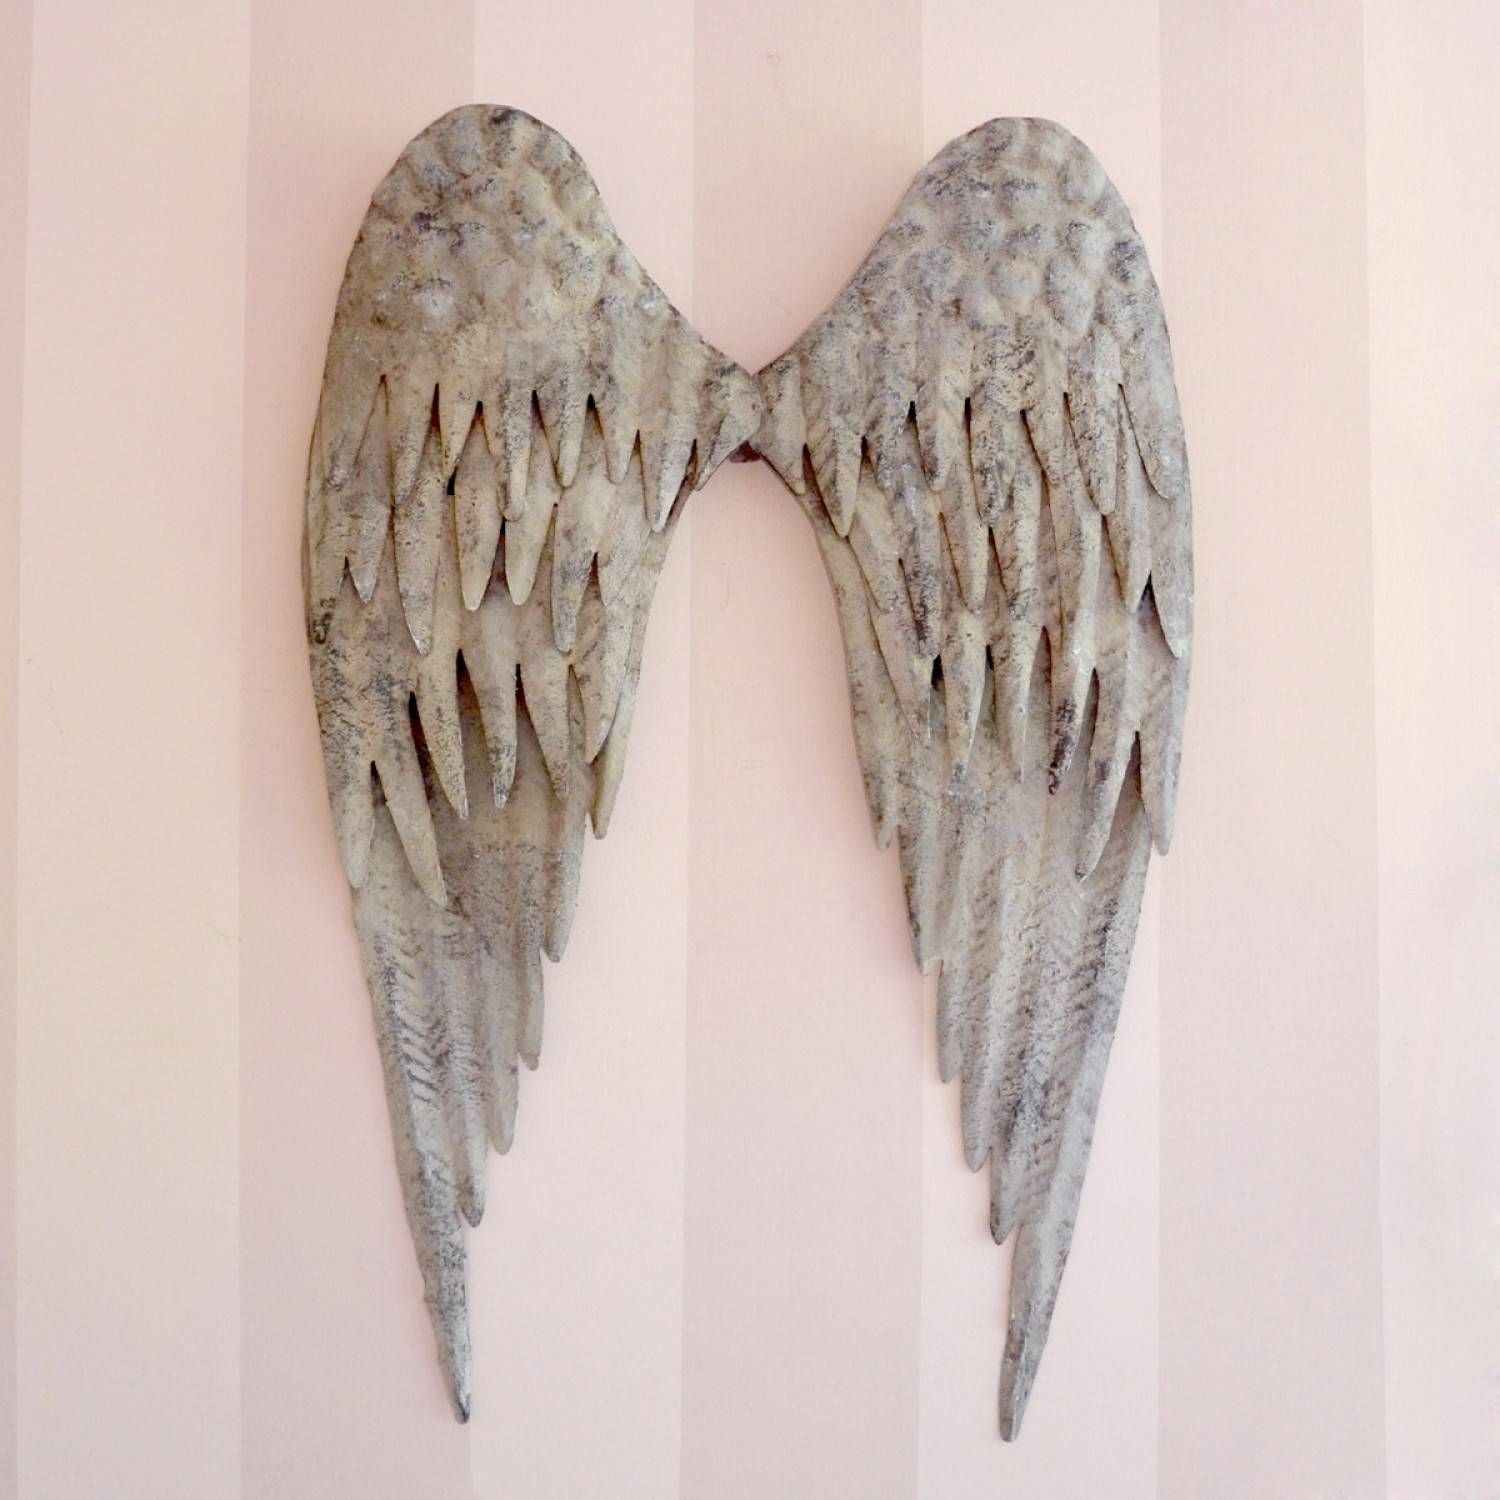 Popular Angel Wings Wall Decor : Garnish With Angel Wings Wall Inside Most Recent Angel Wings Wall Art (View 20 of 20)